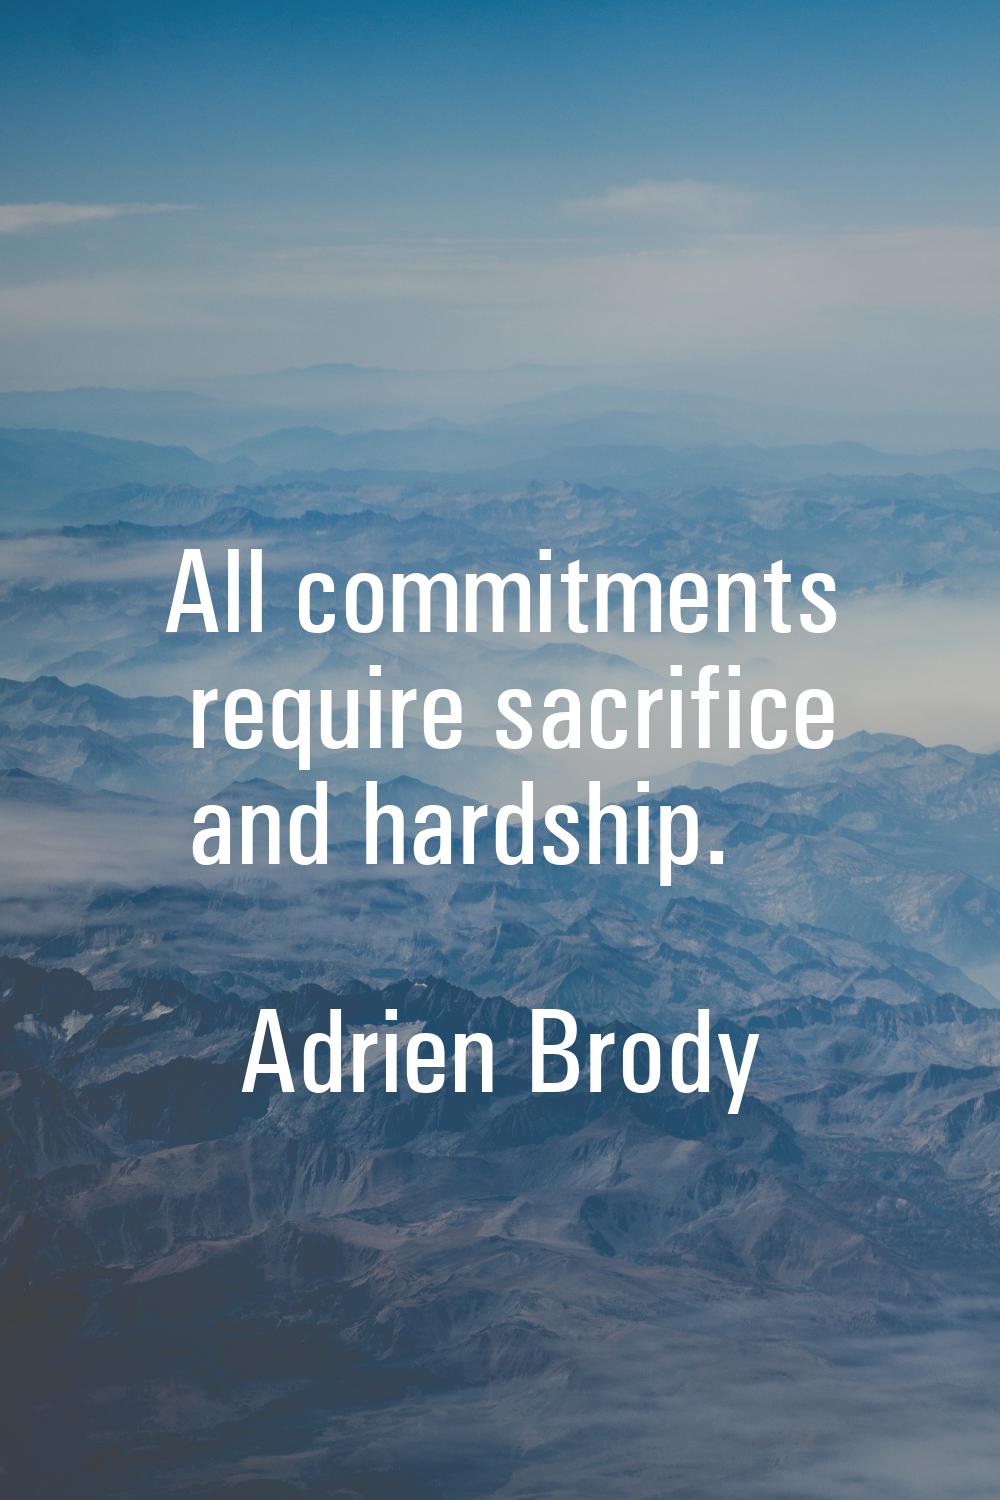 All commitments require sacrifice and hardship.